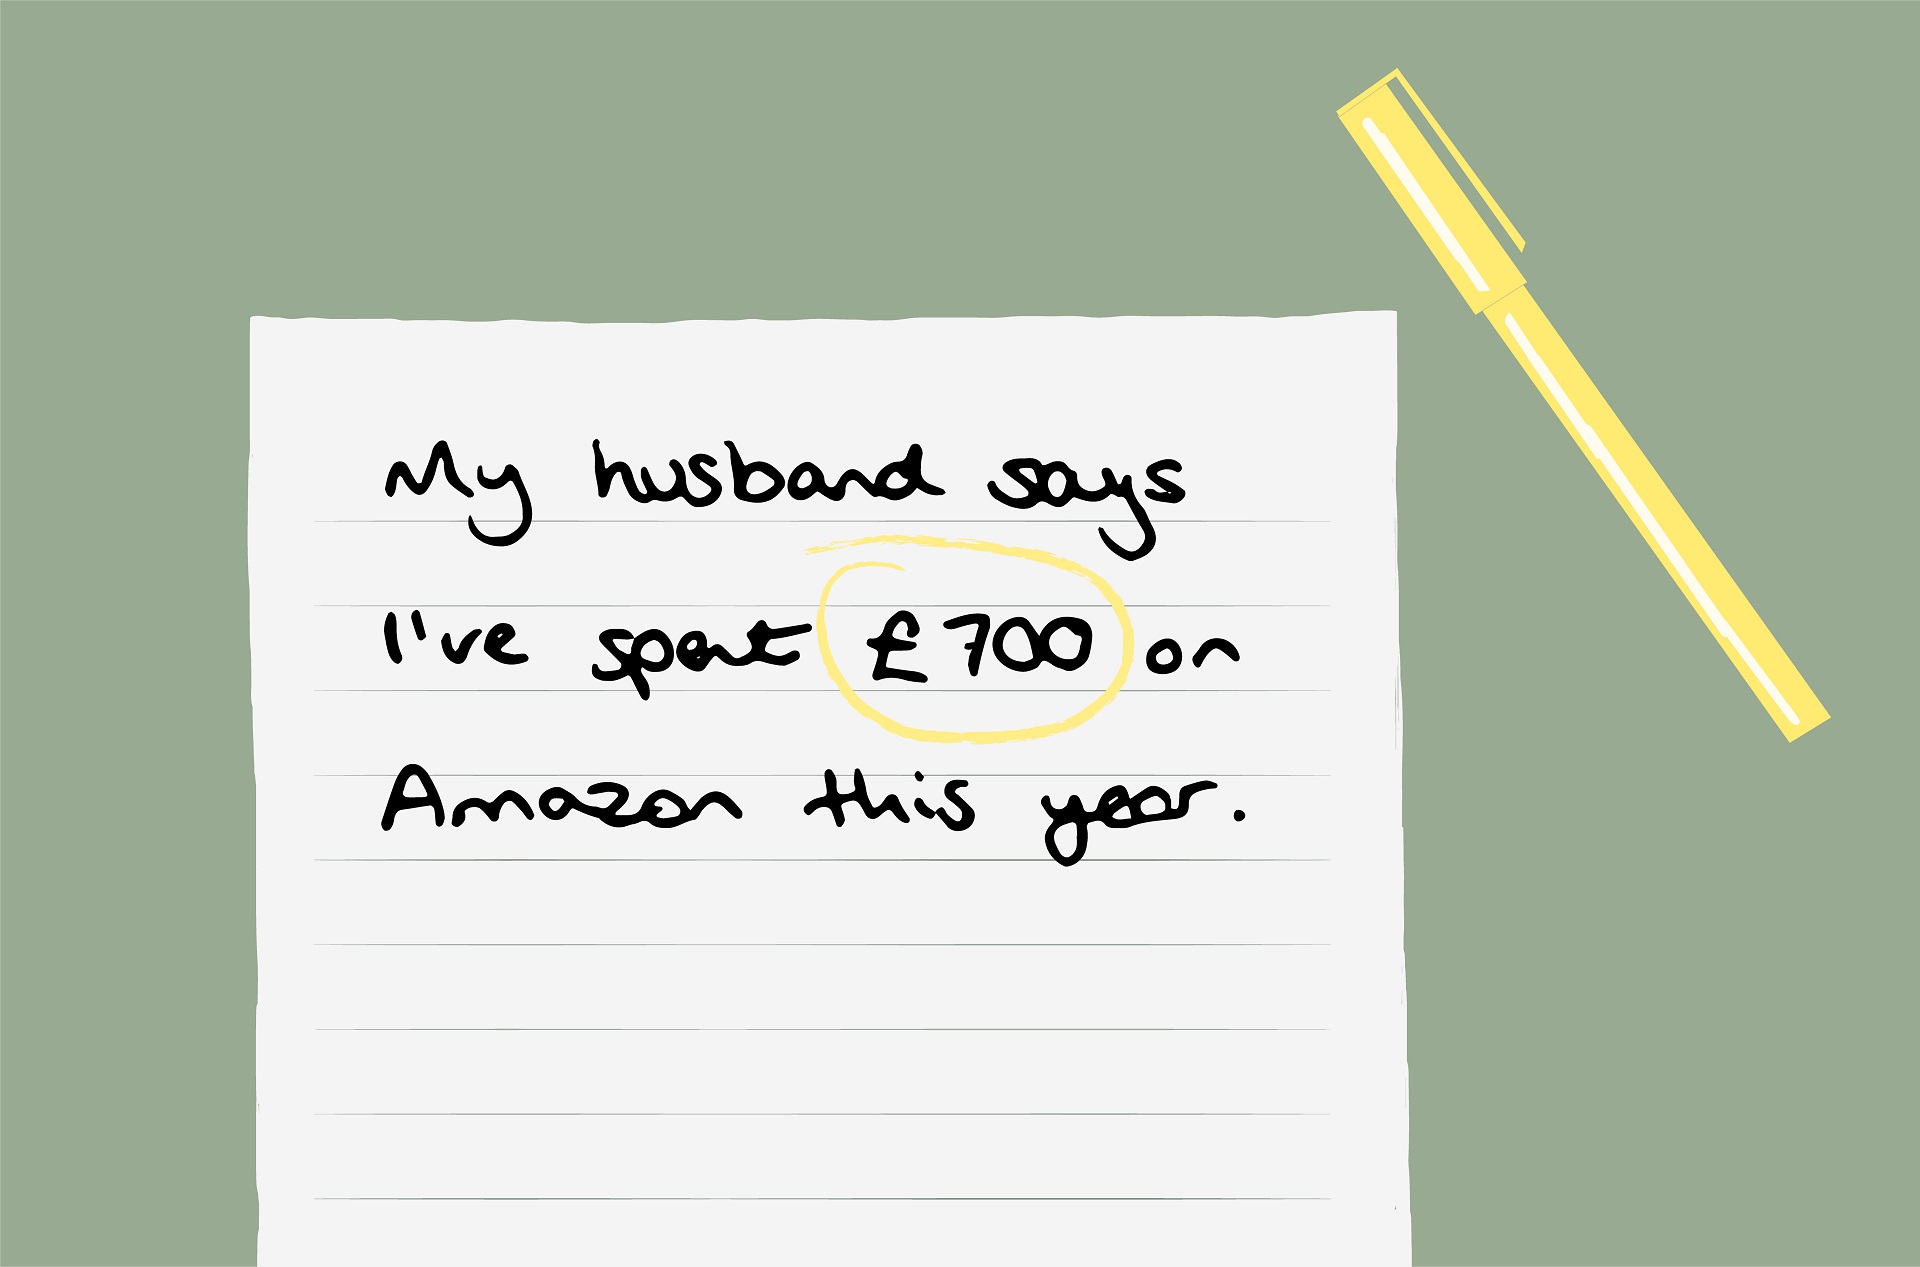 Quote from Luisa about her husband's concern she's spent £700 on Amazon this year